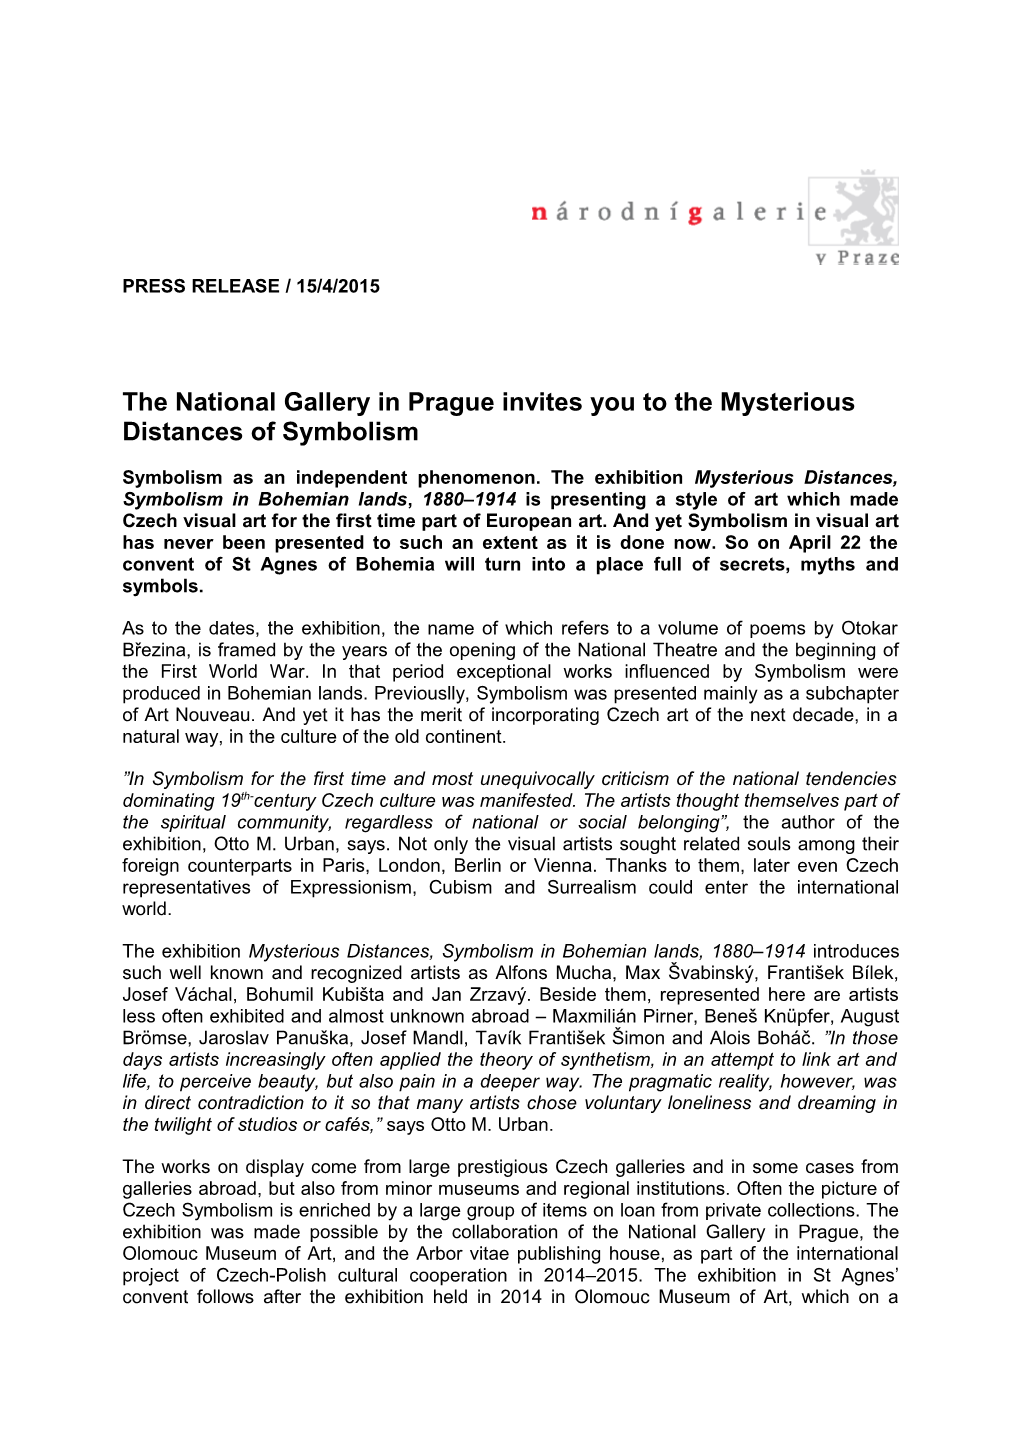 The National Gallery in Prague Invites You to the Mysterious Distances of Symbolism